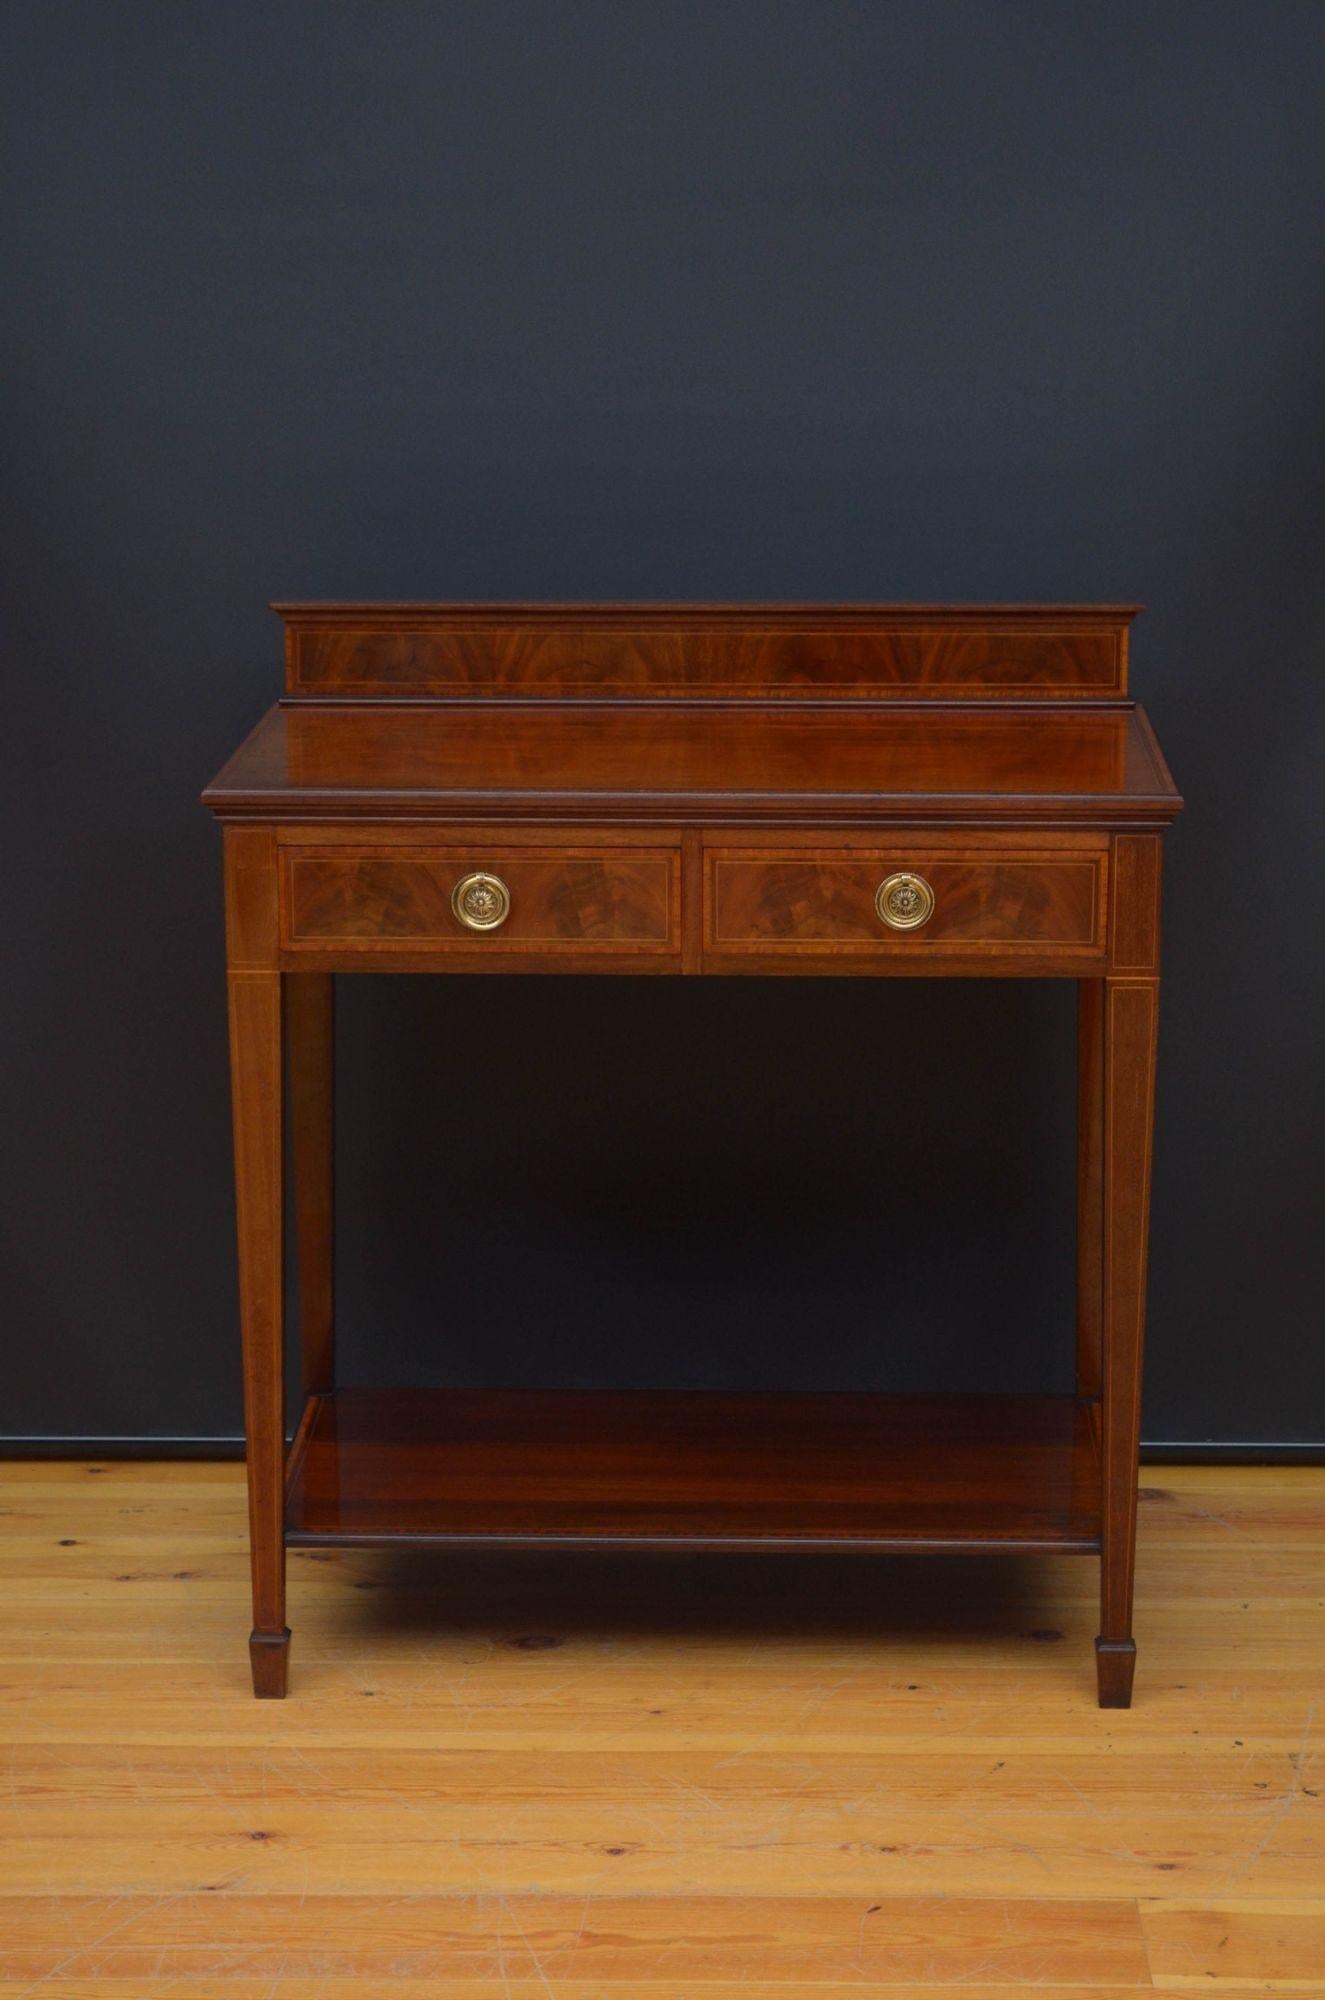 Sn5496 Fine quality Edwardian mahogany server or a console table, having moulded and inlaid upstand to the back edge and a figured mahogany top with satinwood crossbanded and string inlaid edge above two oak lined and crossbanded drawers fitted with